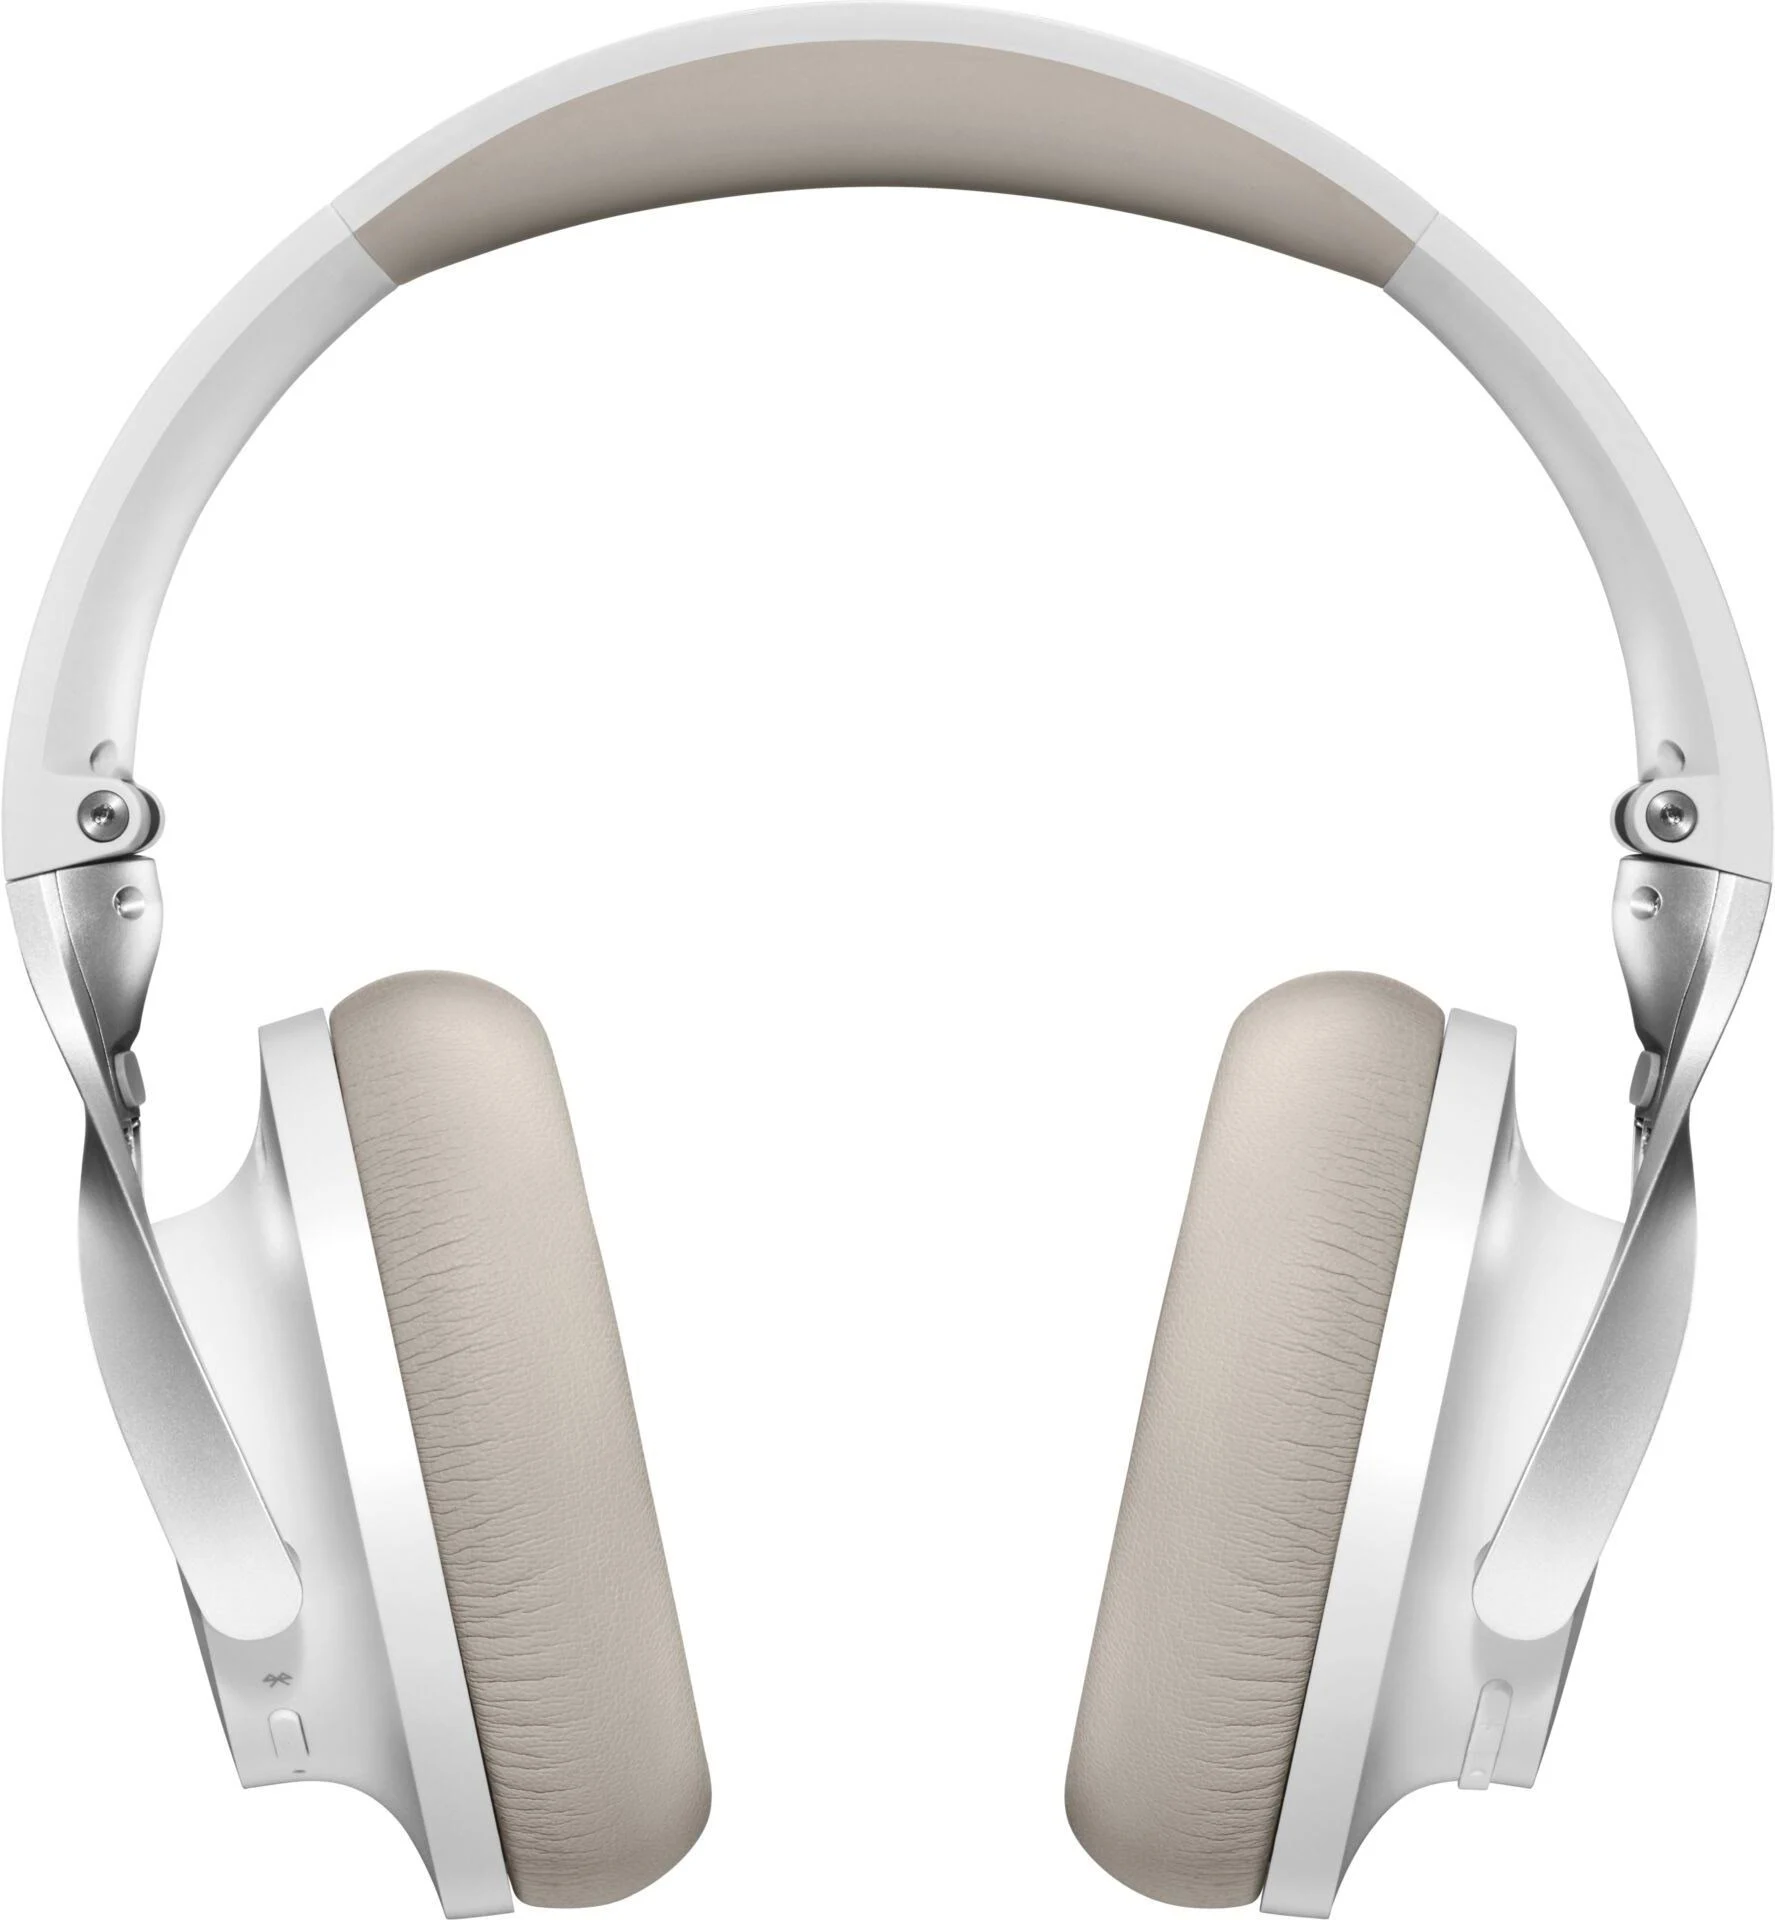 SBH1DYWH1 AONIC 40 Wireless Noise Cancelling Headphones, White